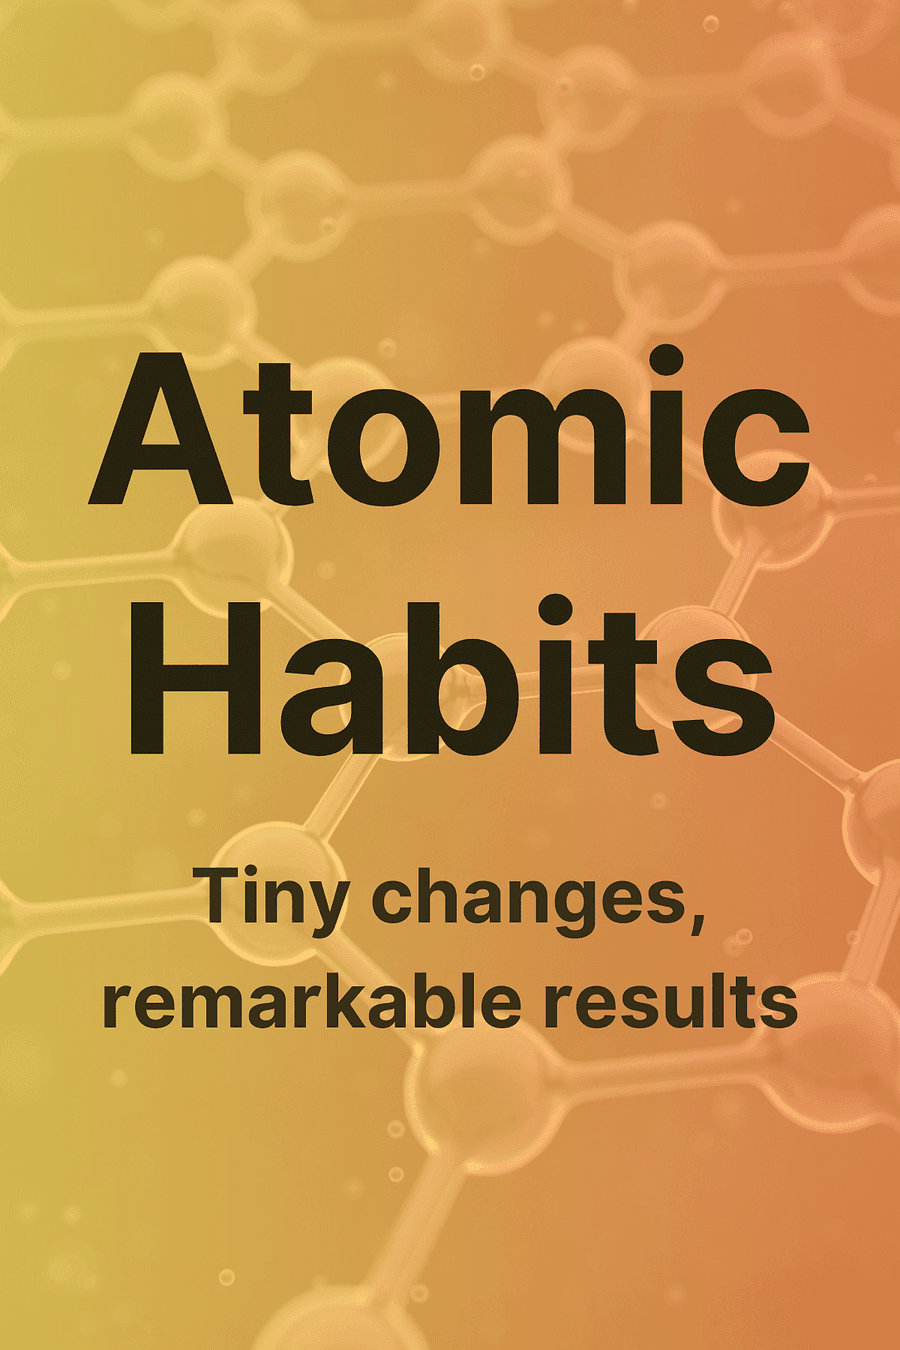 Atomic Habits by James Clear - Book Summary